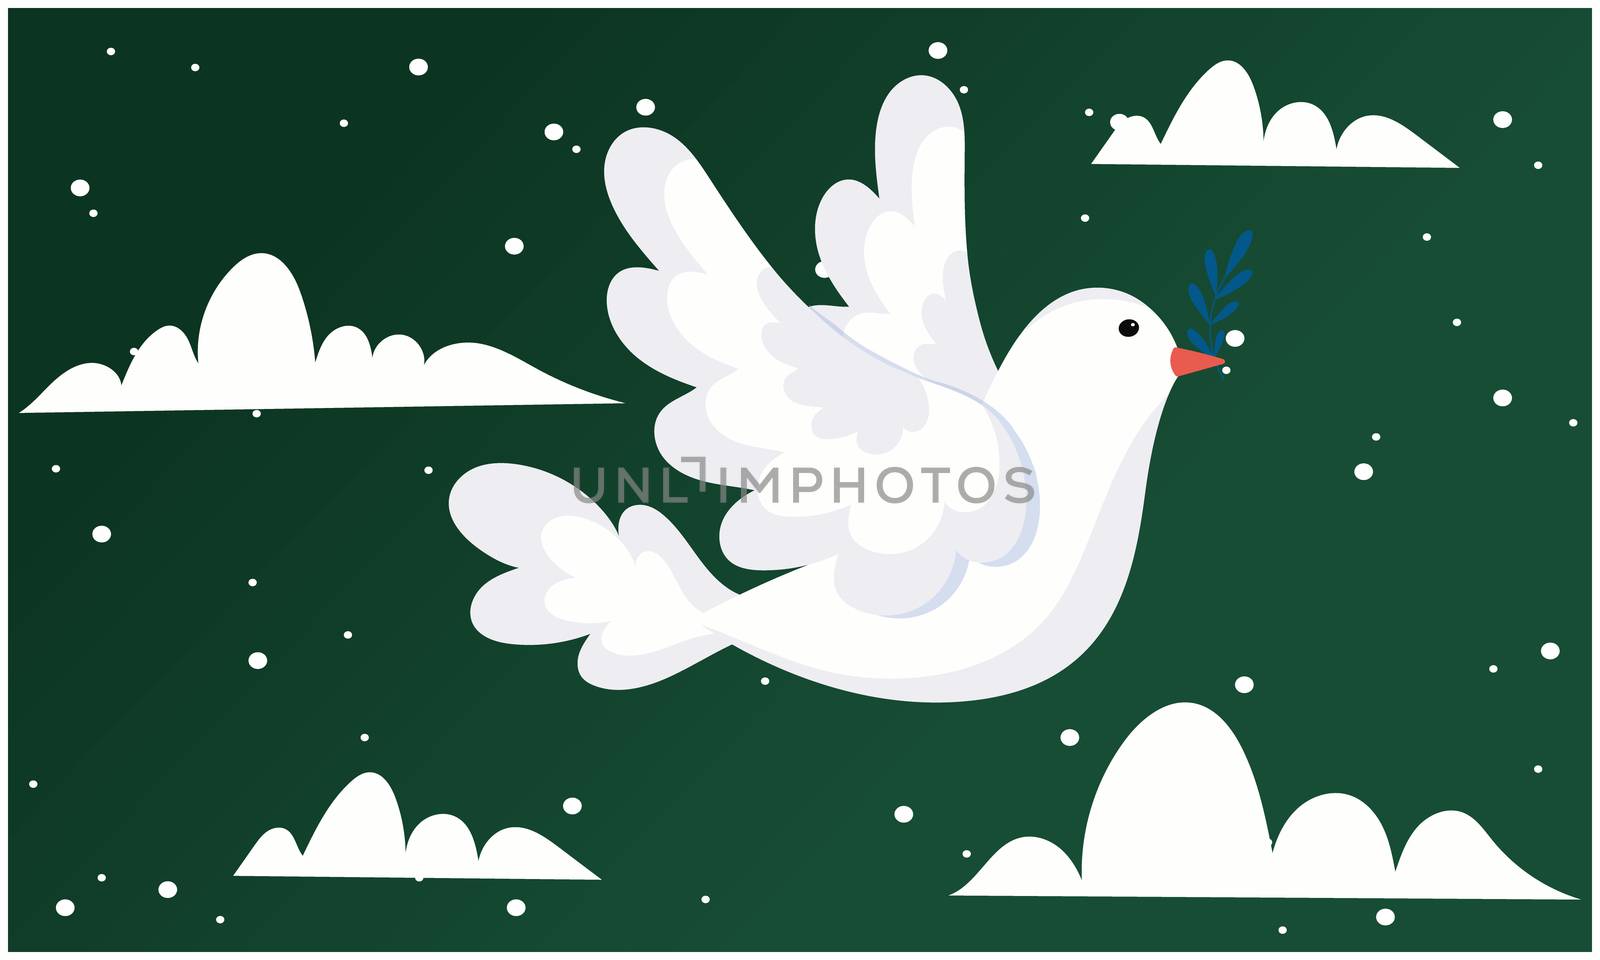 bird and cloud flat design on green background by aanavcreationsplus